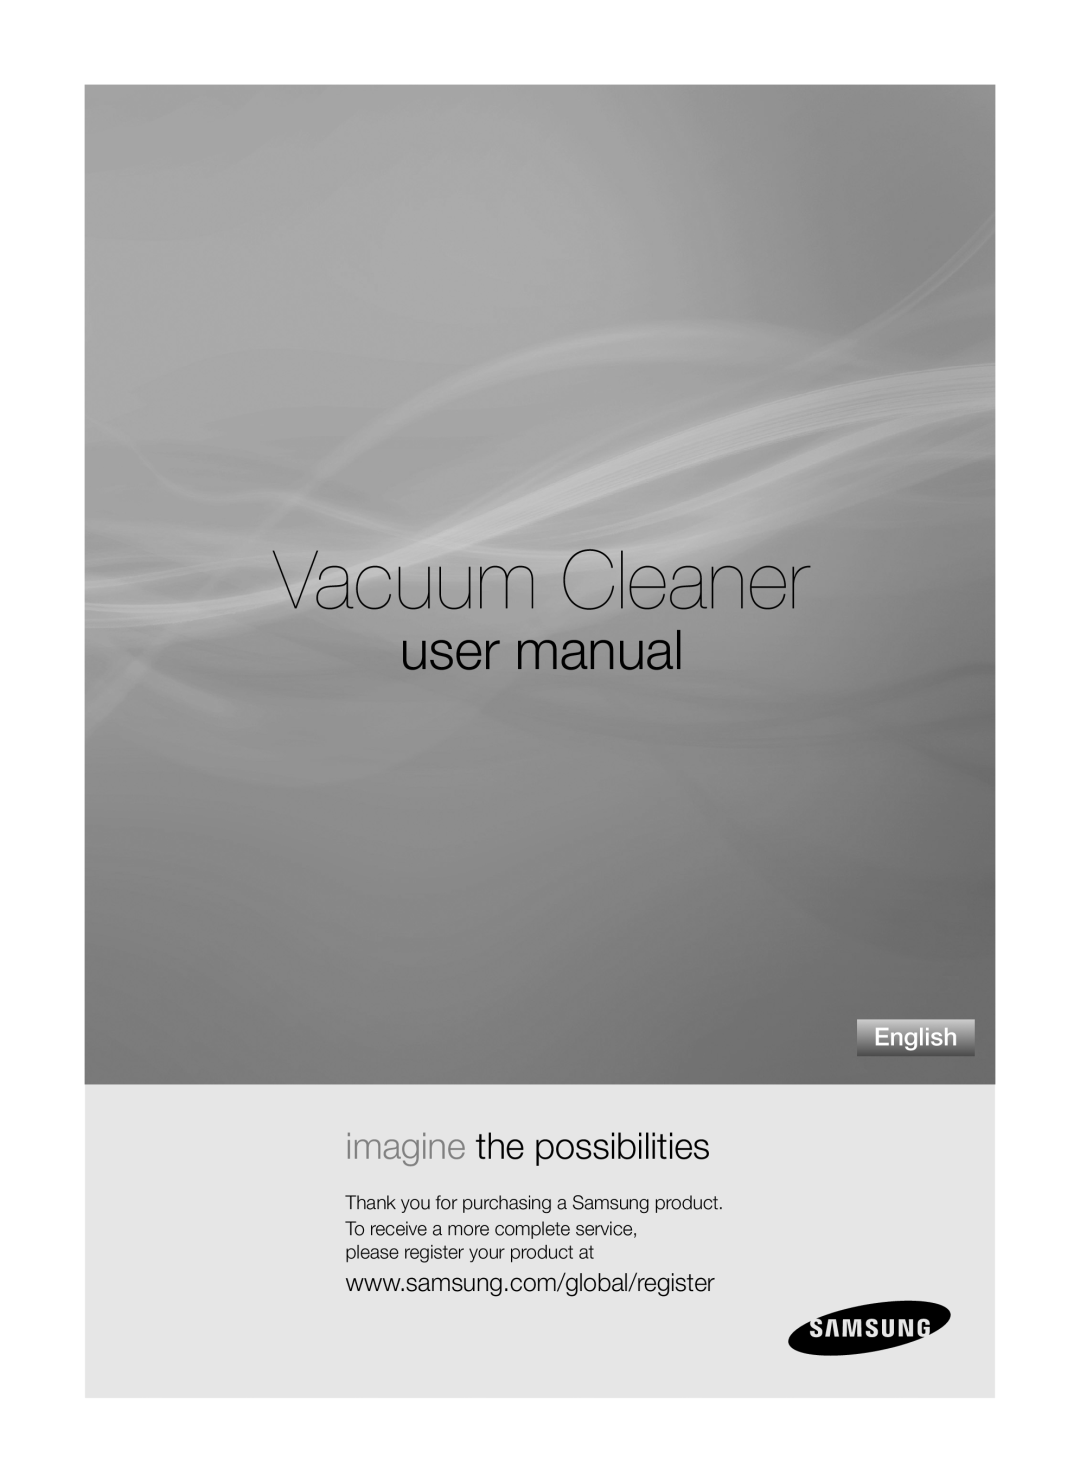 Samsung DJ68-00264B user manual Assembling the cleaner, Product accessories, Carton contents, Vacuum Cleaner, English 